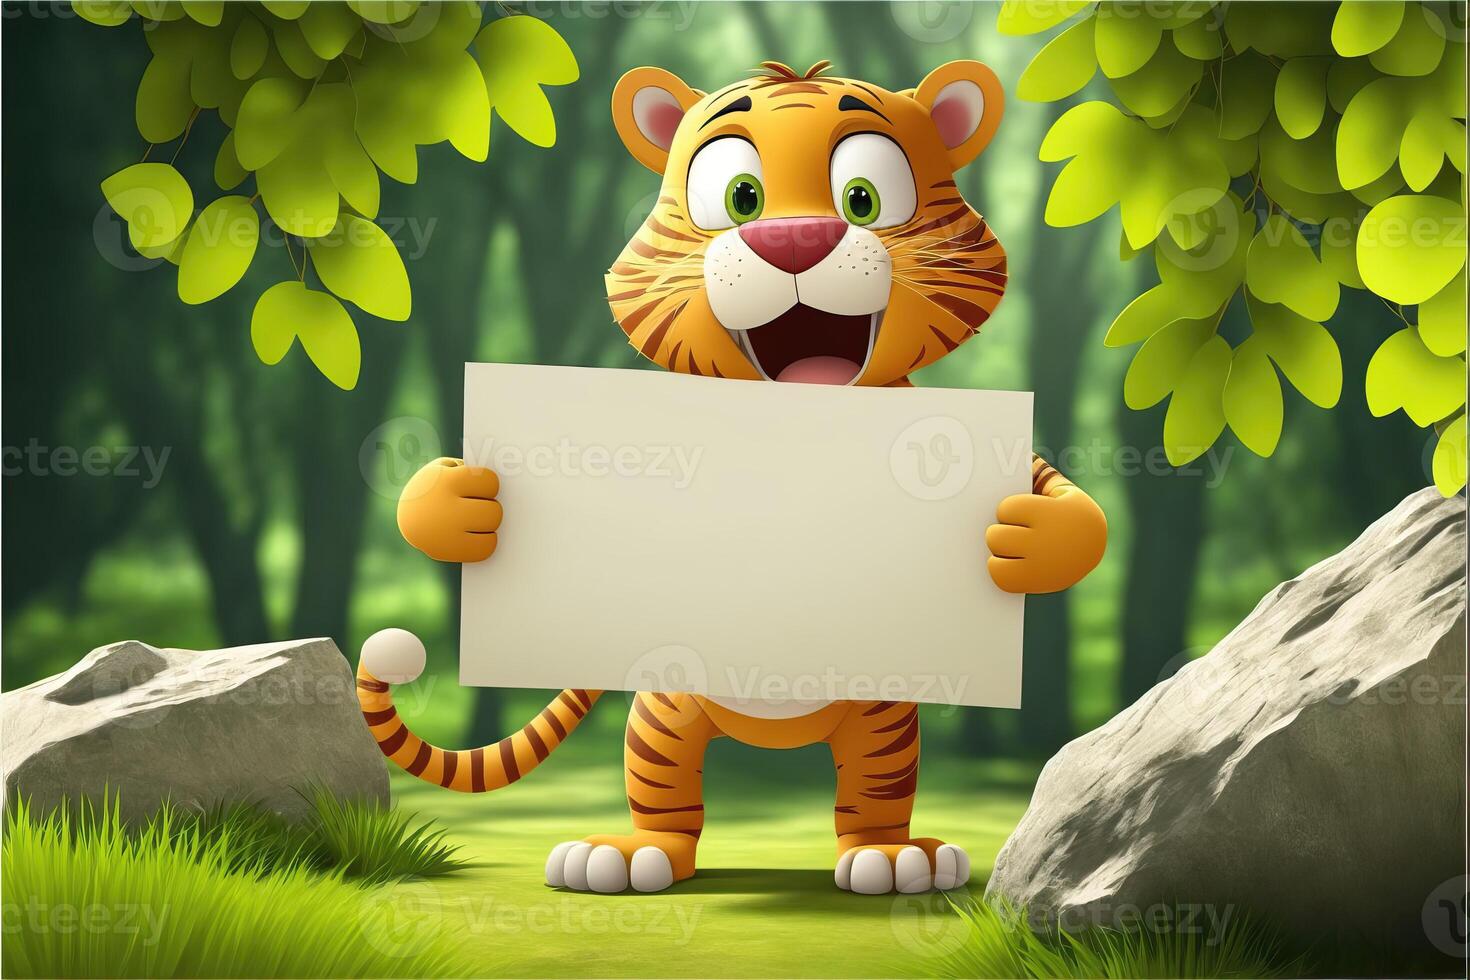 3D cute tiger cartoon holding blank sign. 3D animal background. Suitable for banners, signs, logos, sales, discount, product promotions, etc. photo